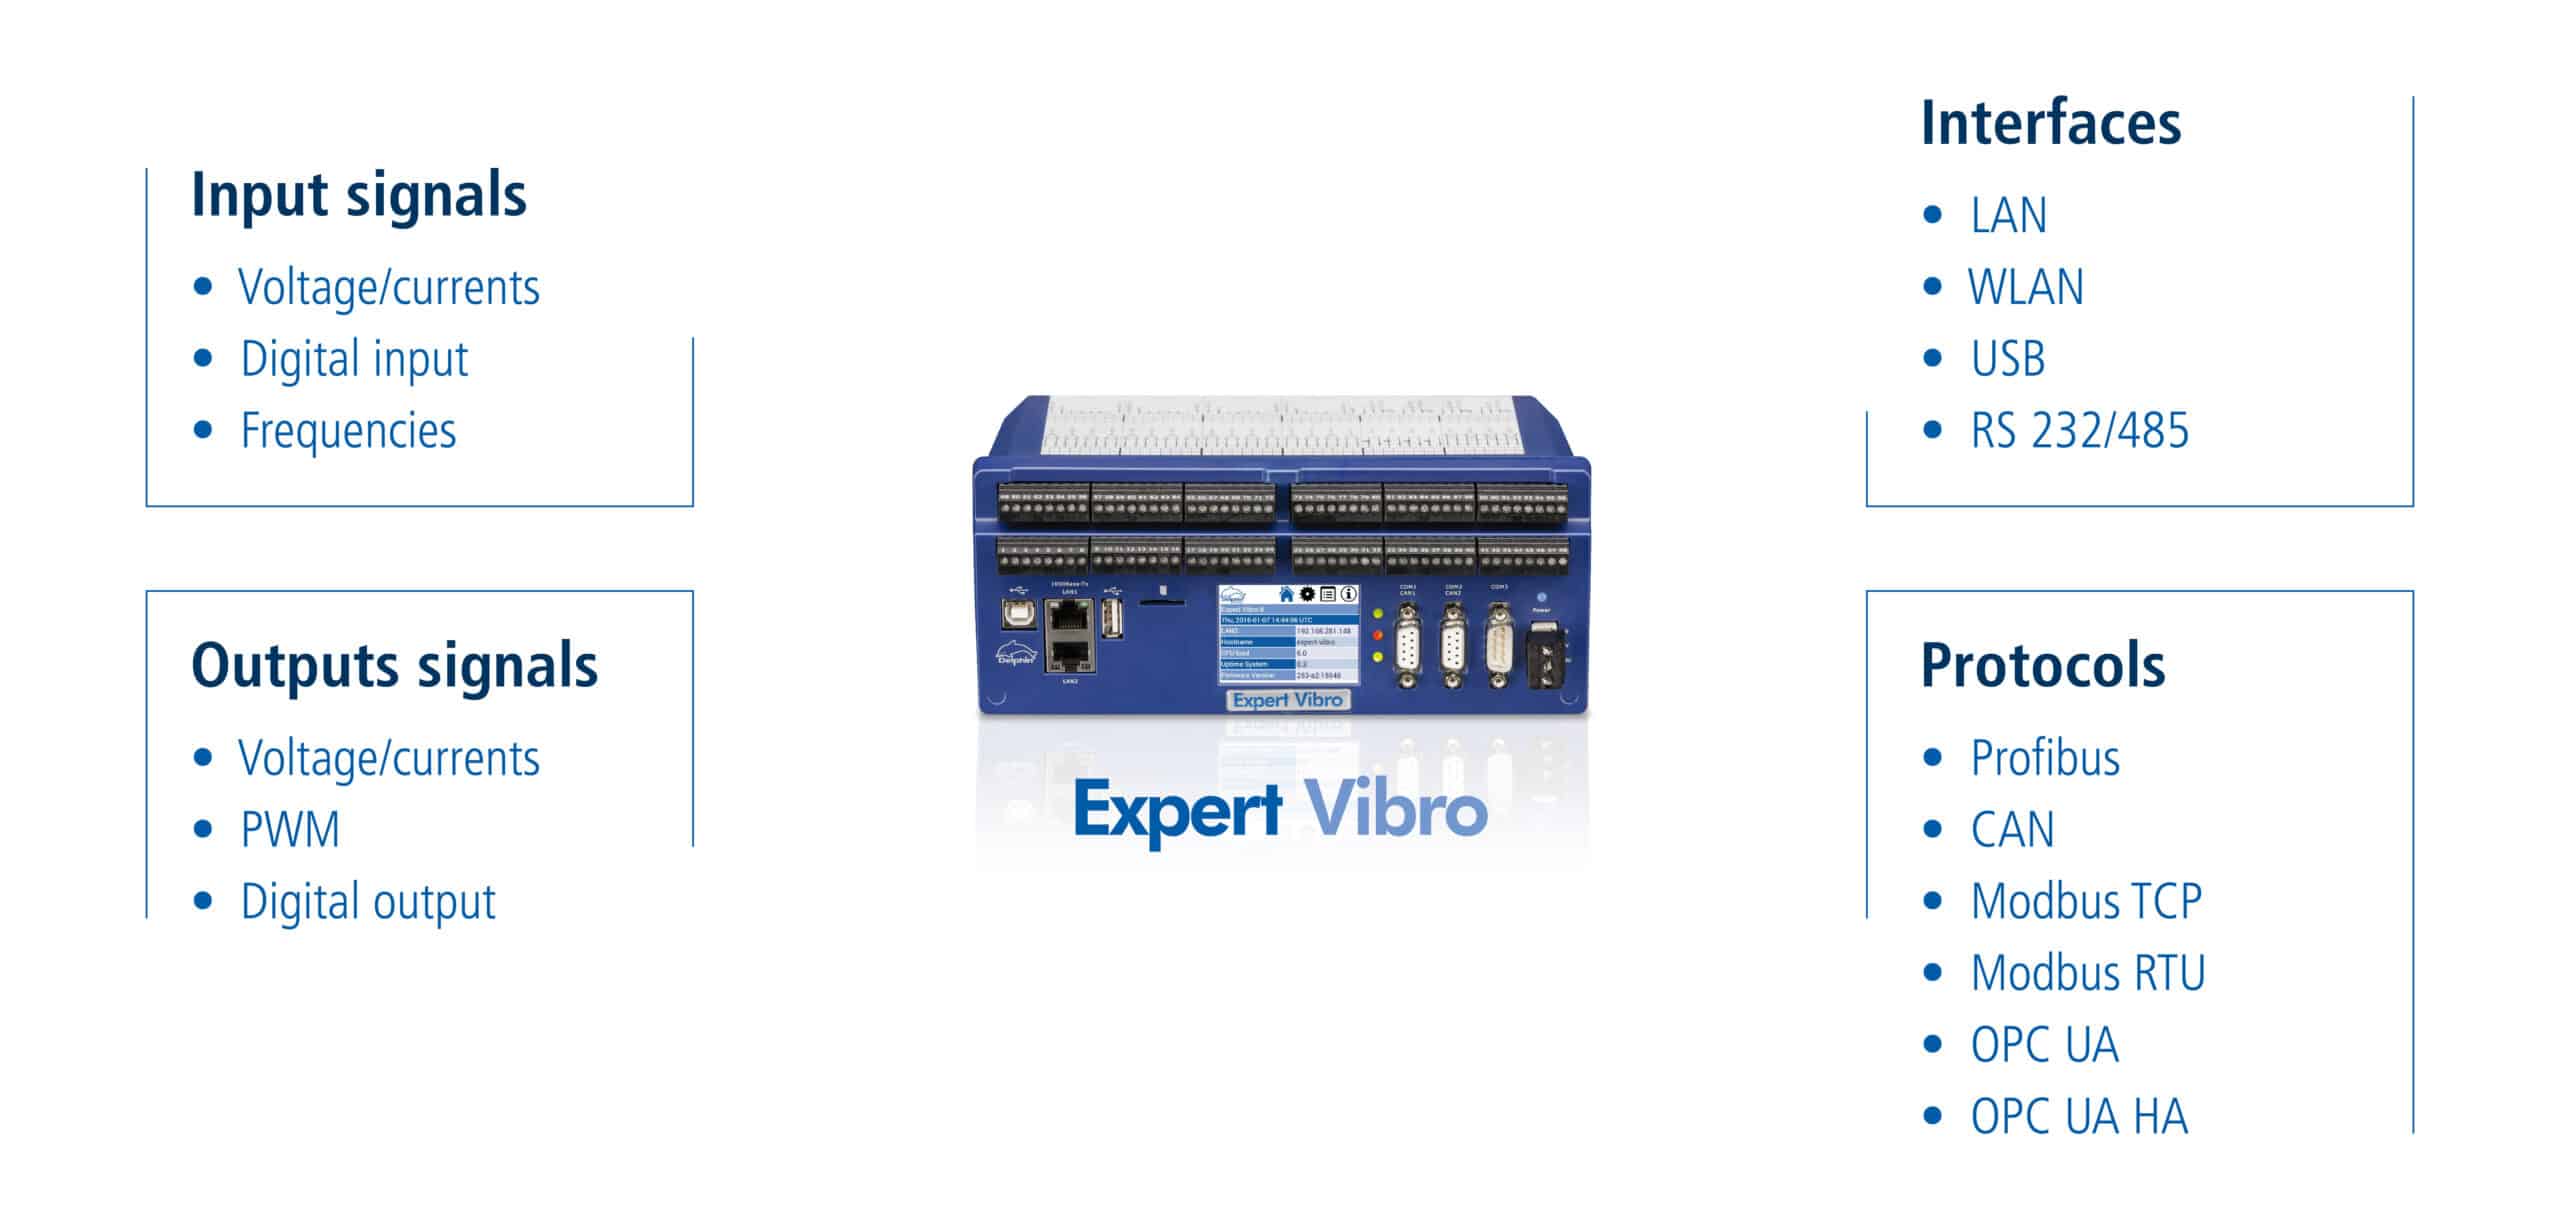 State-of-the-art processor technology and extreme precision for vibration measurement.